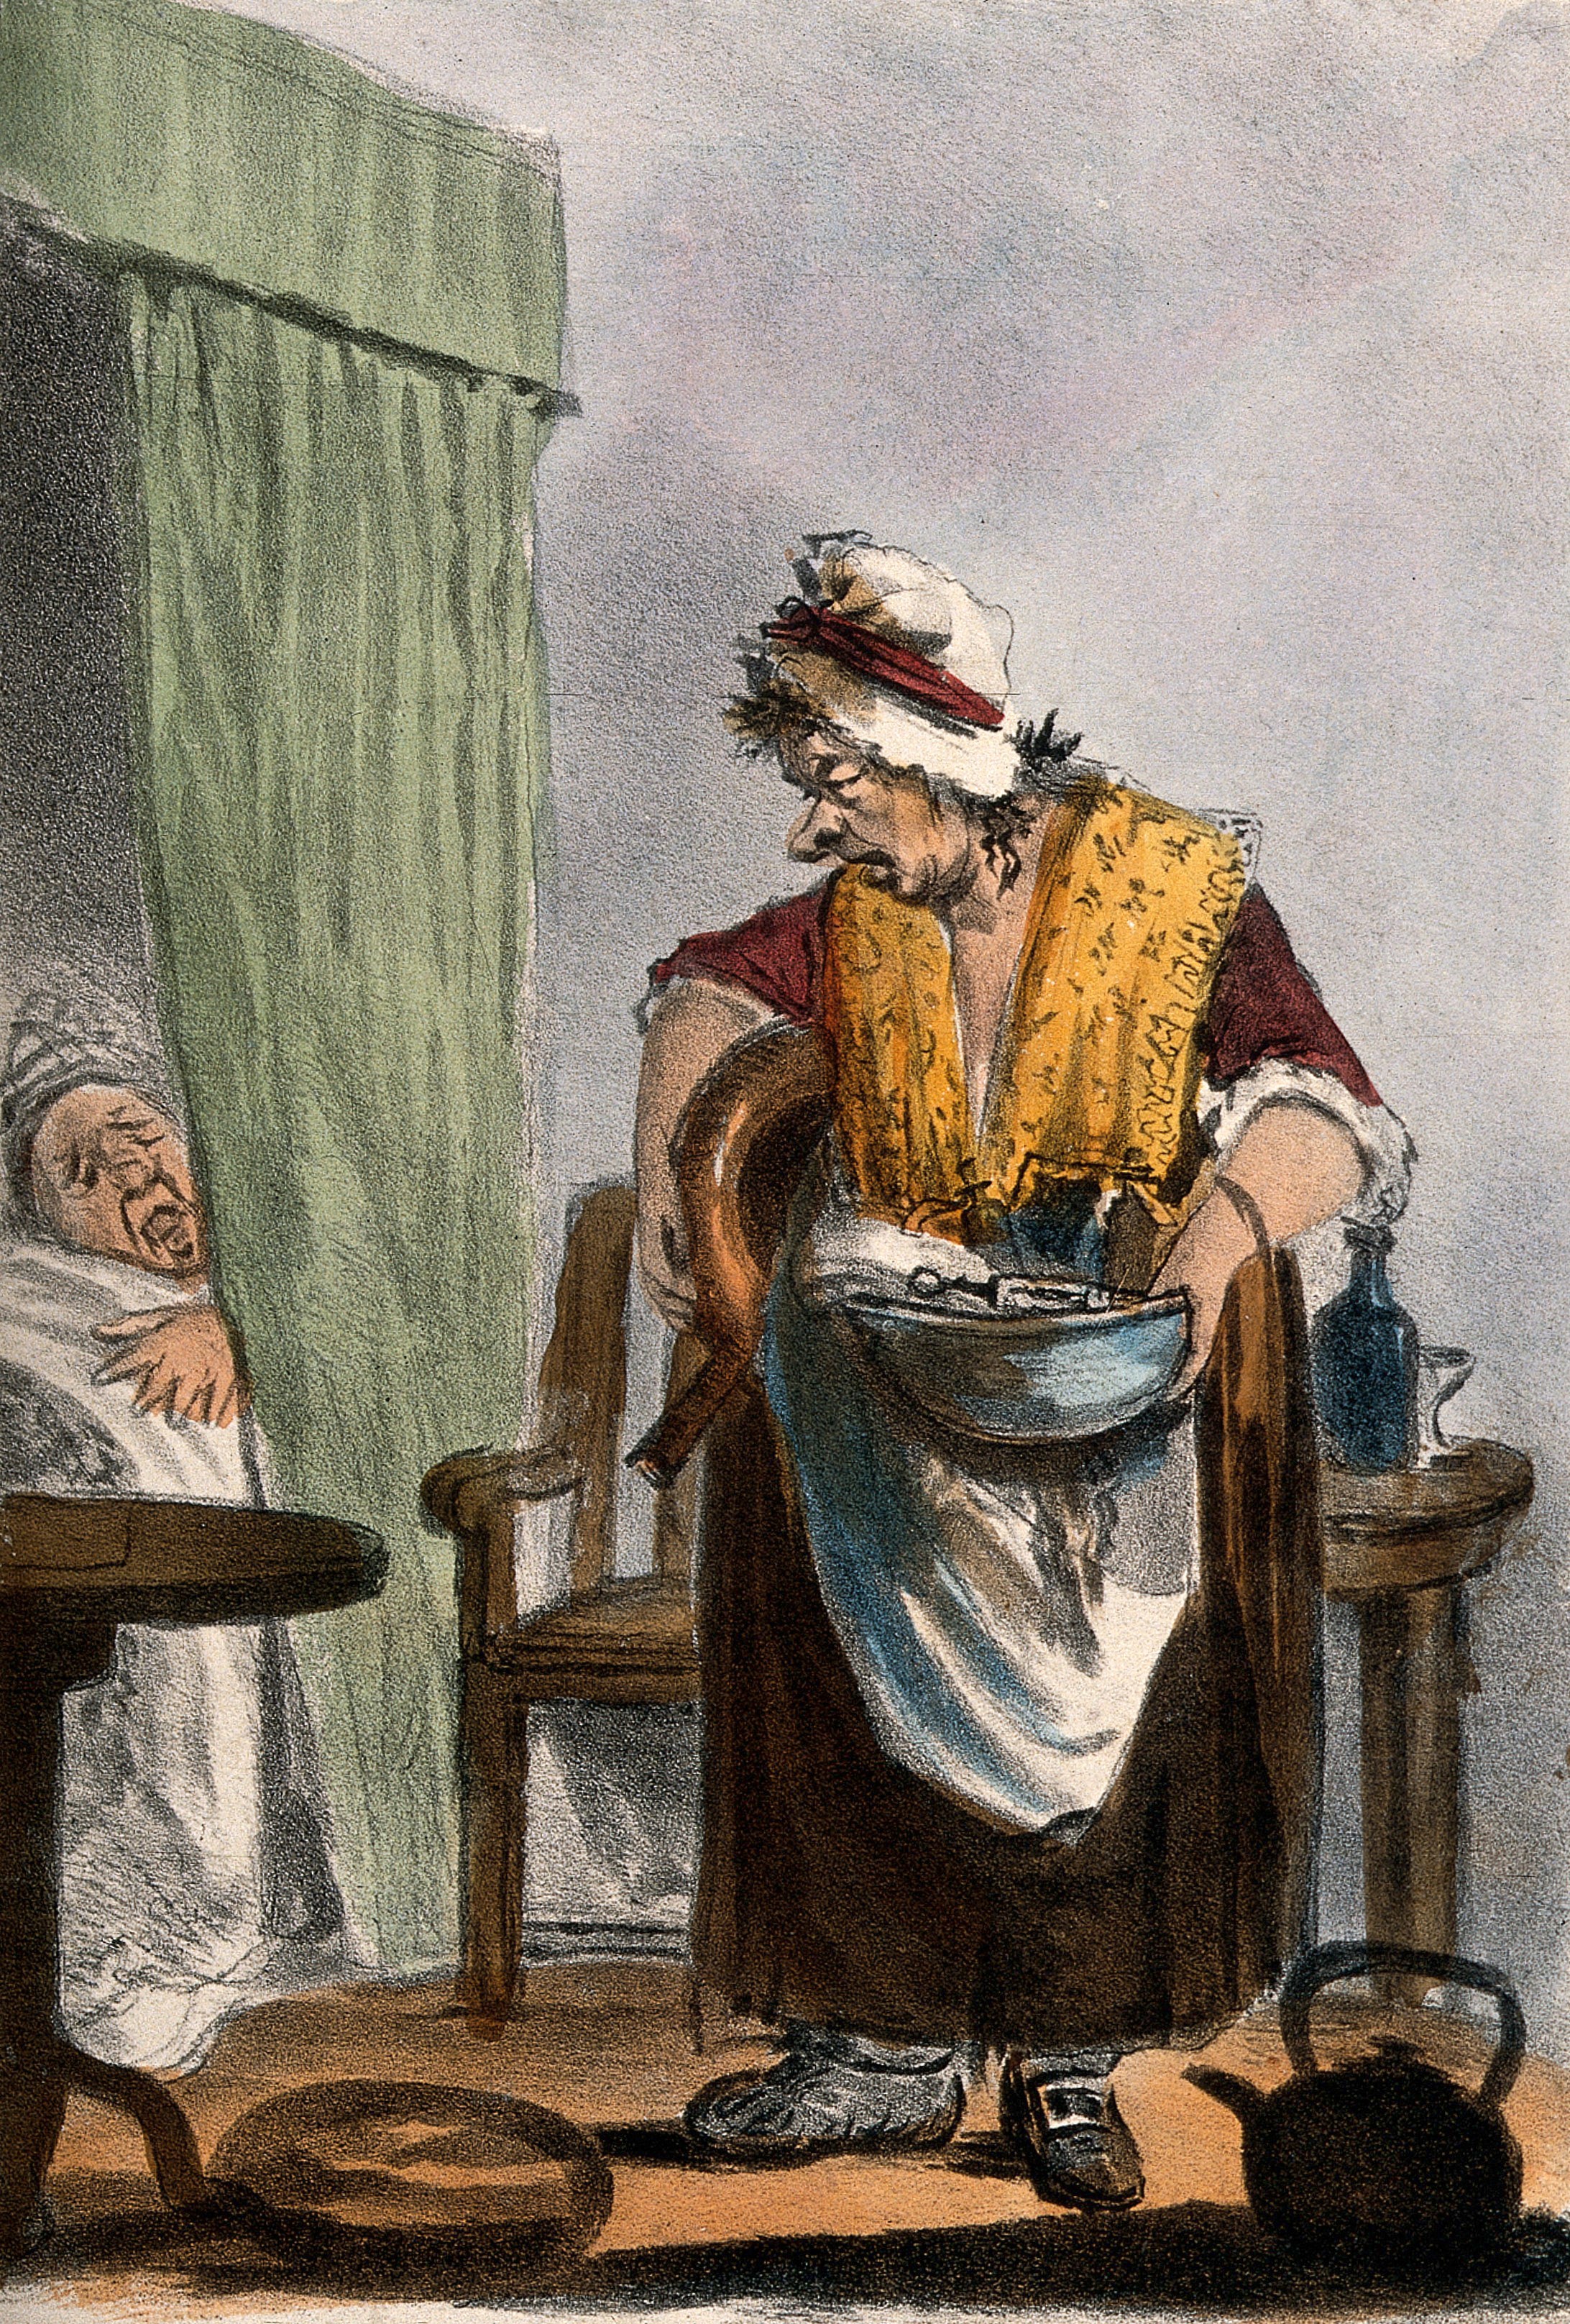 “A dishevelled nurse with her disgruntled patient. Coloured lithograph by W. Hunt.” (Wellcome Collection).